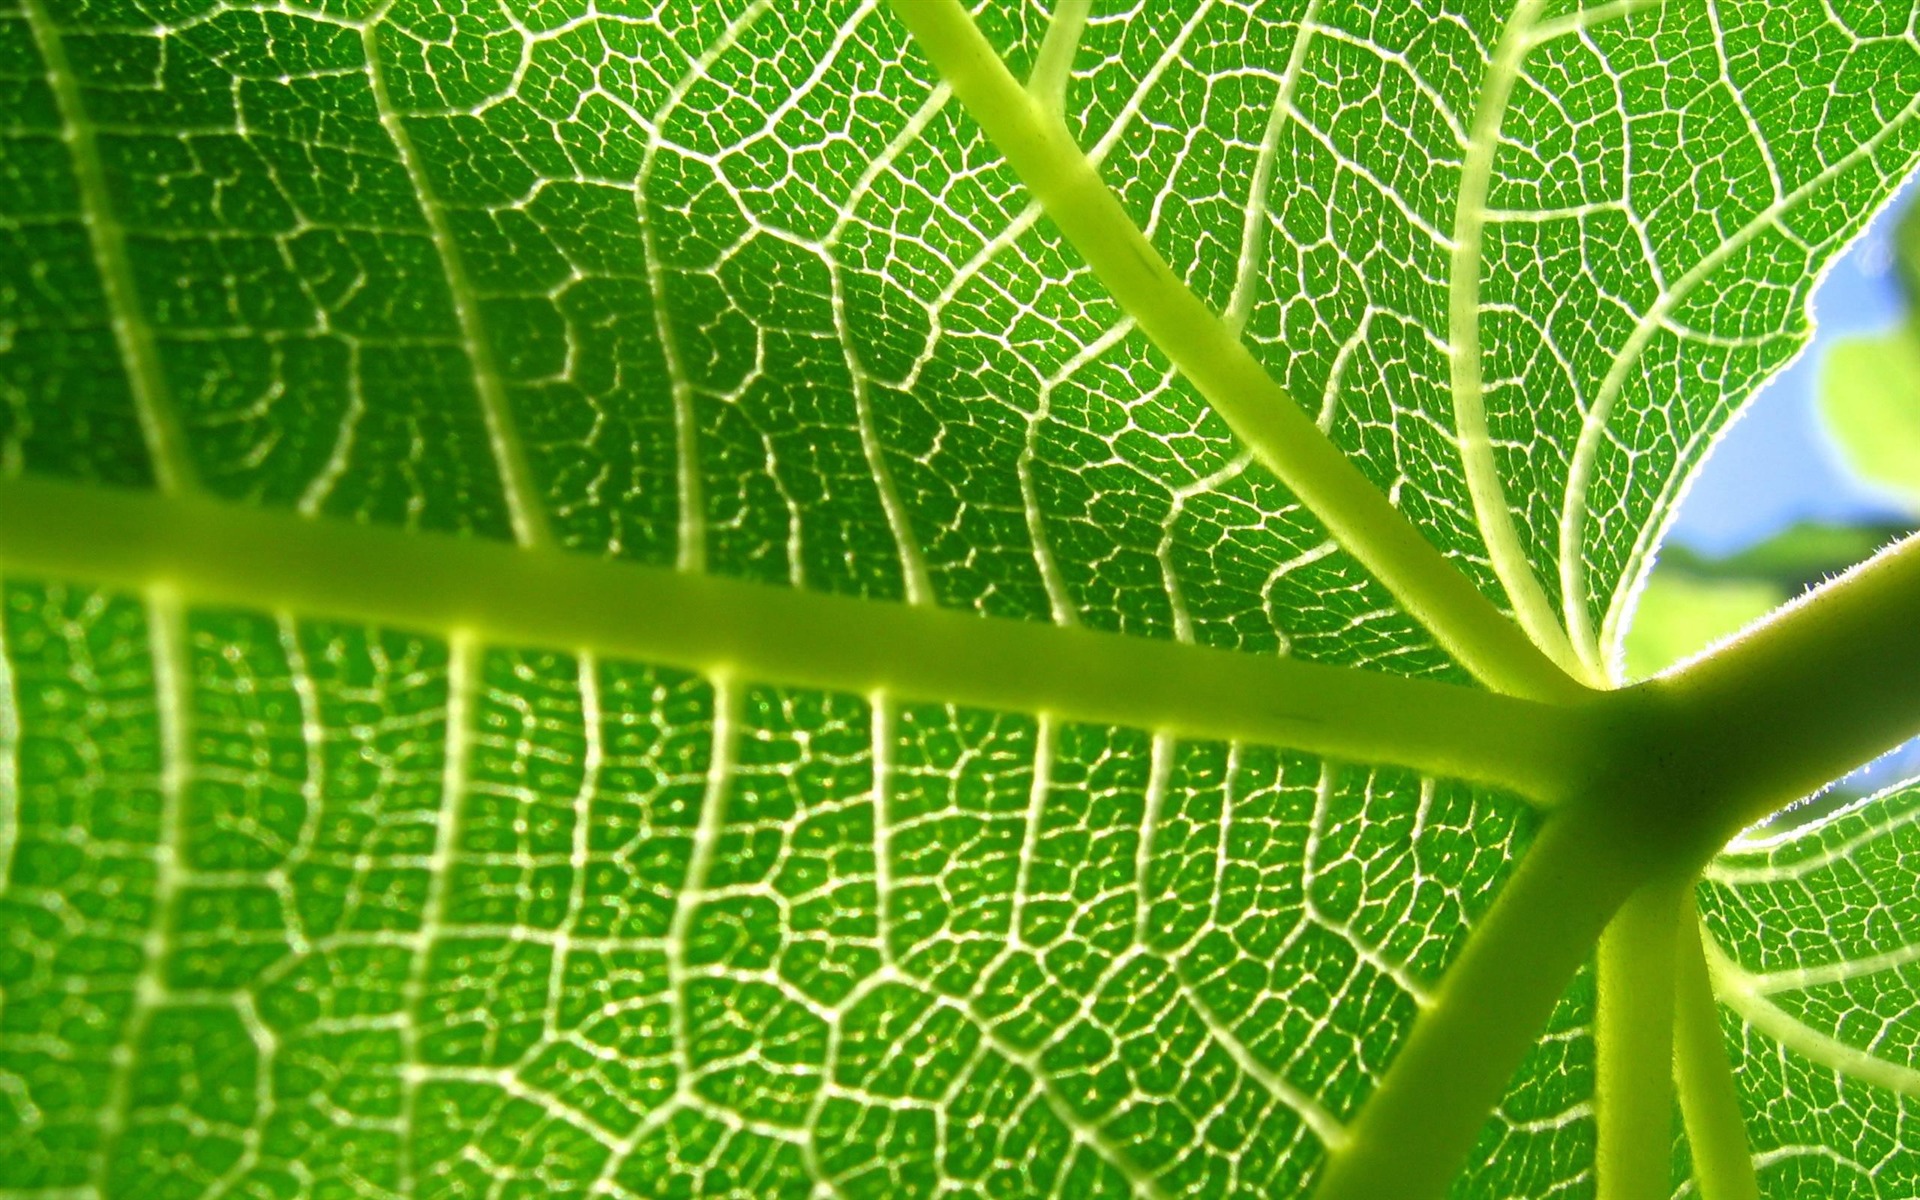 Large green leaves close-up flower wallpaper (2) #13 - 1920x1200